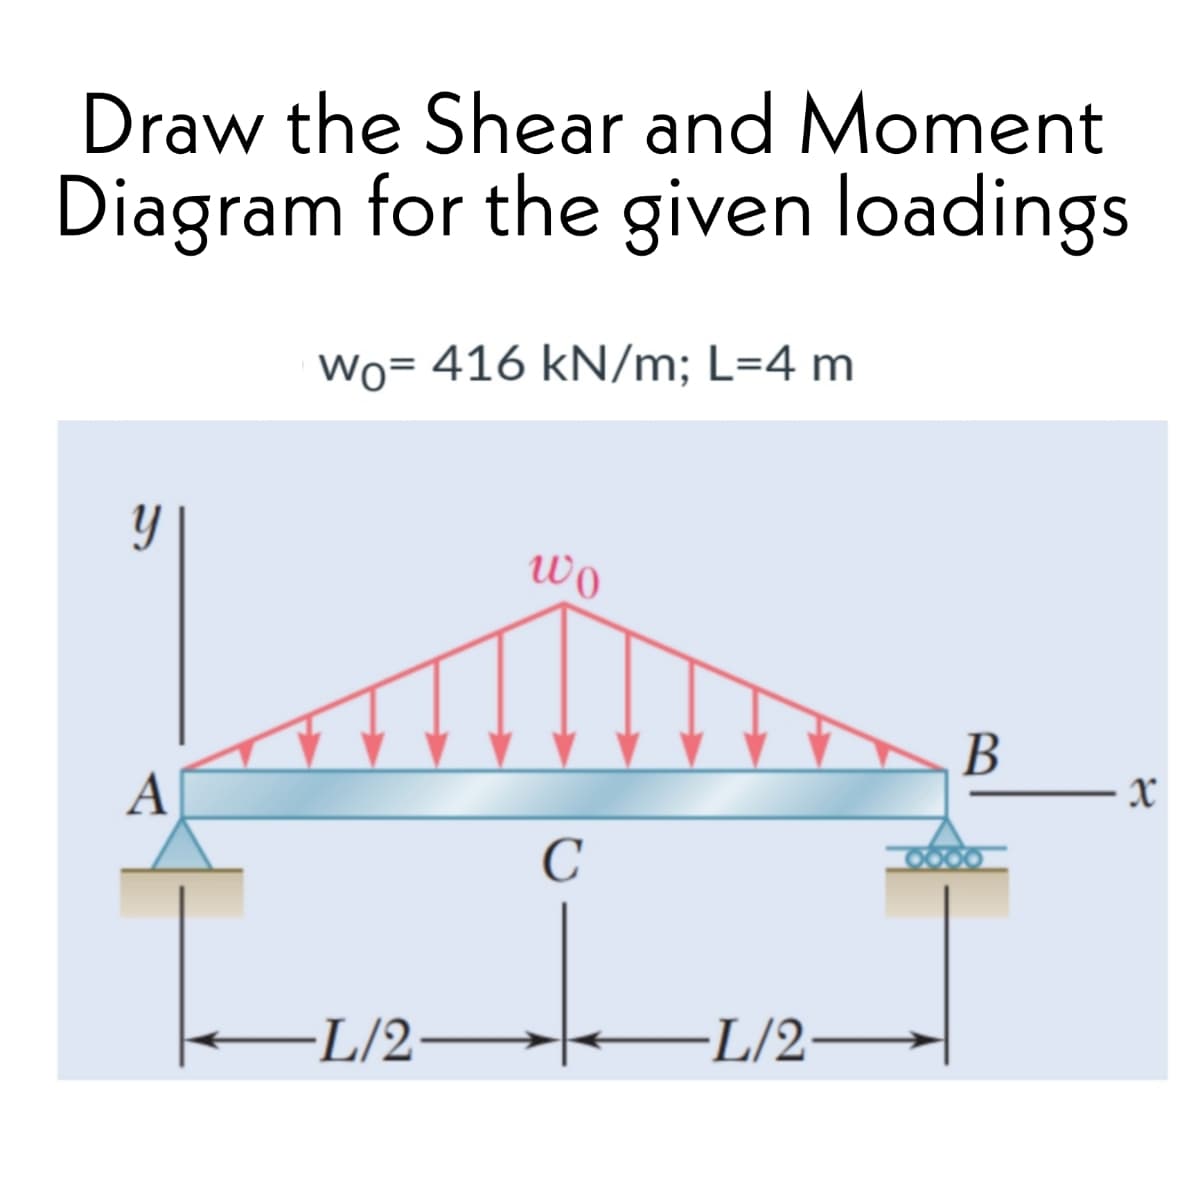 Draw the Shear and Moment
Diagram for the given loadings
y
A
Wo= 416 kN/m; L=4 m
L/2-
wo
с
-L/2-
B
x